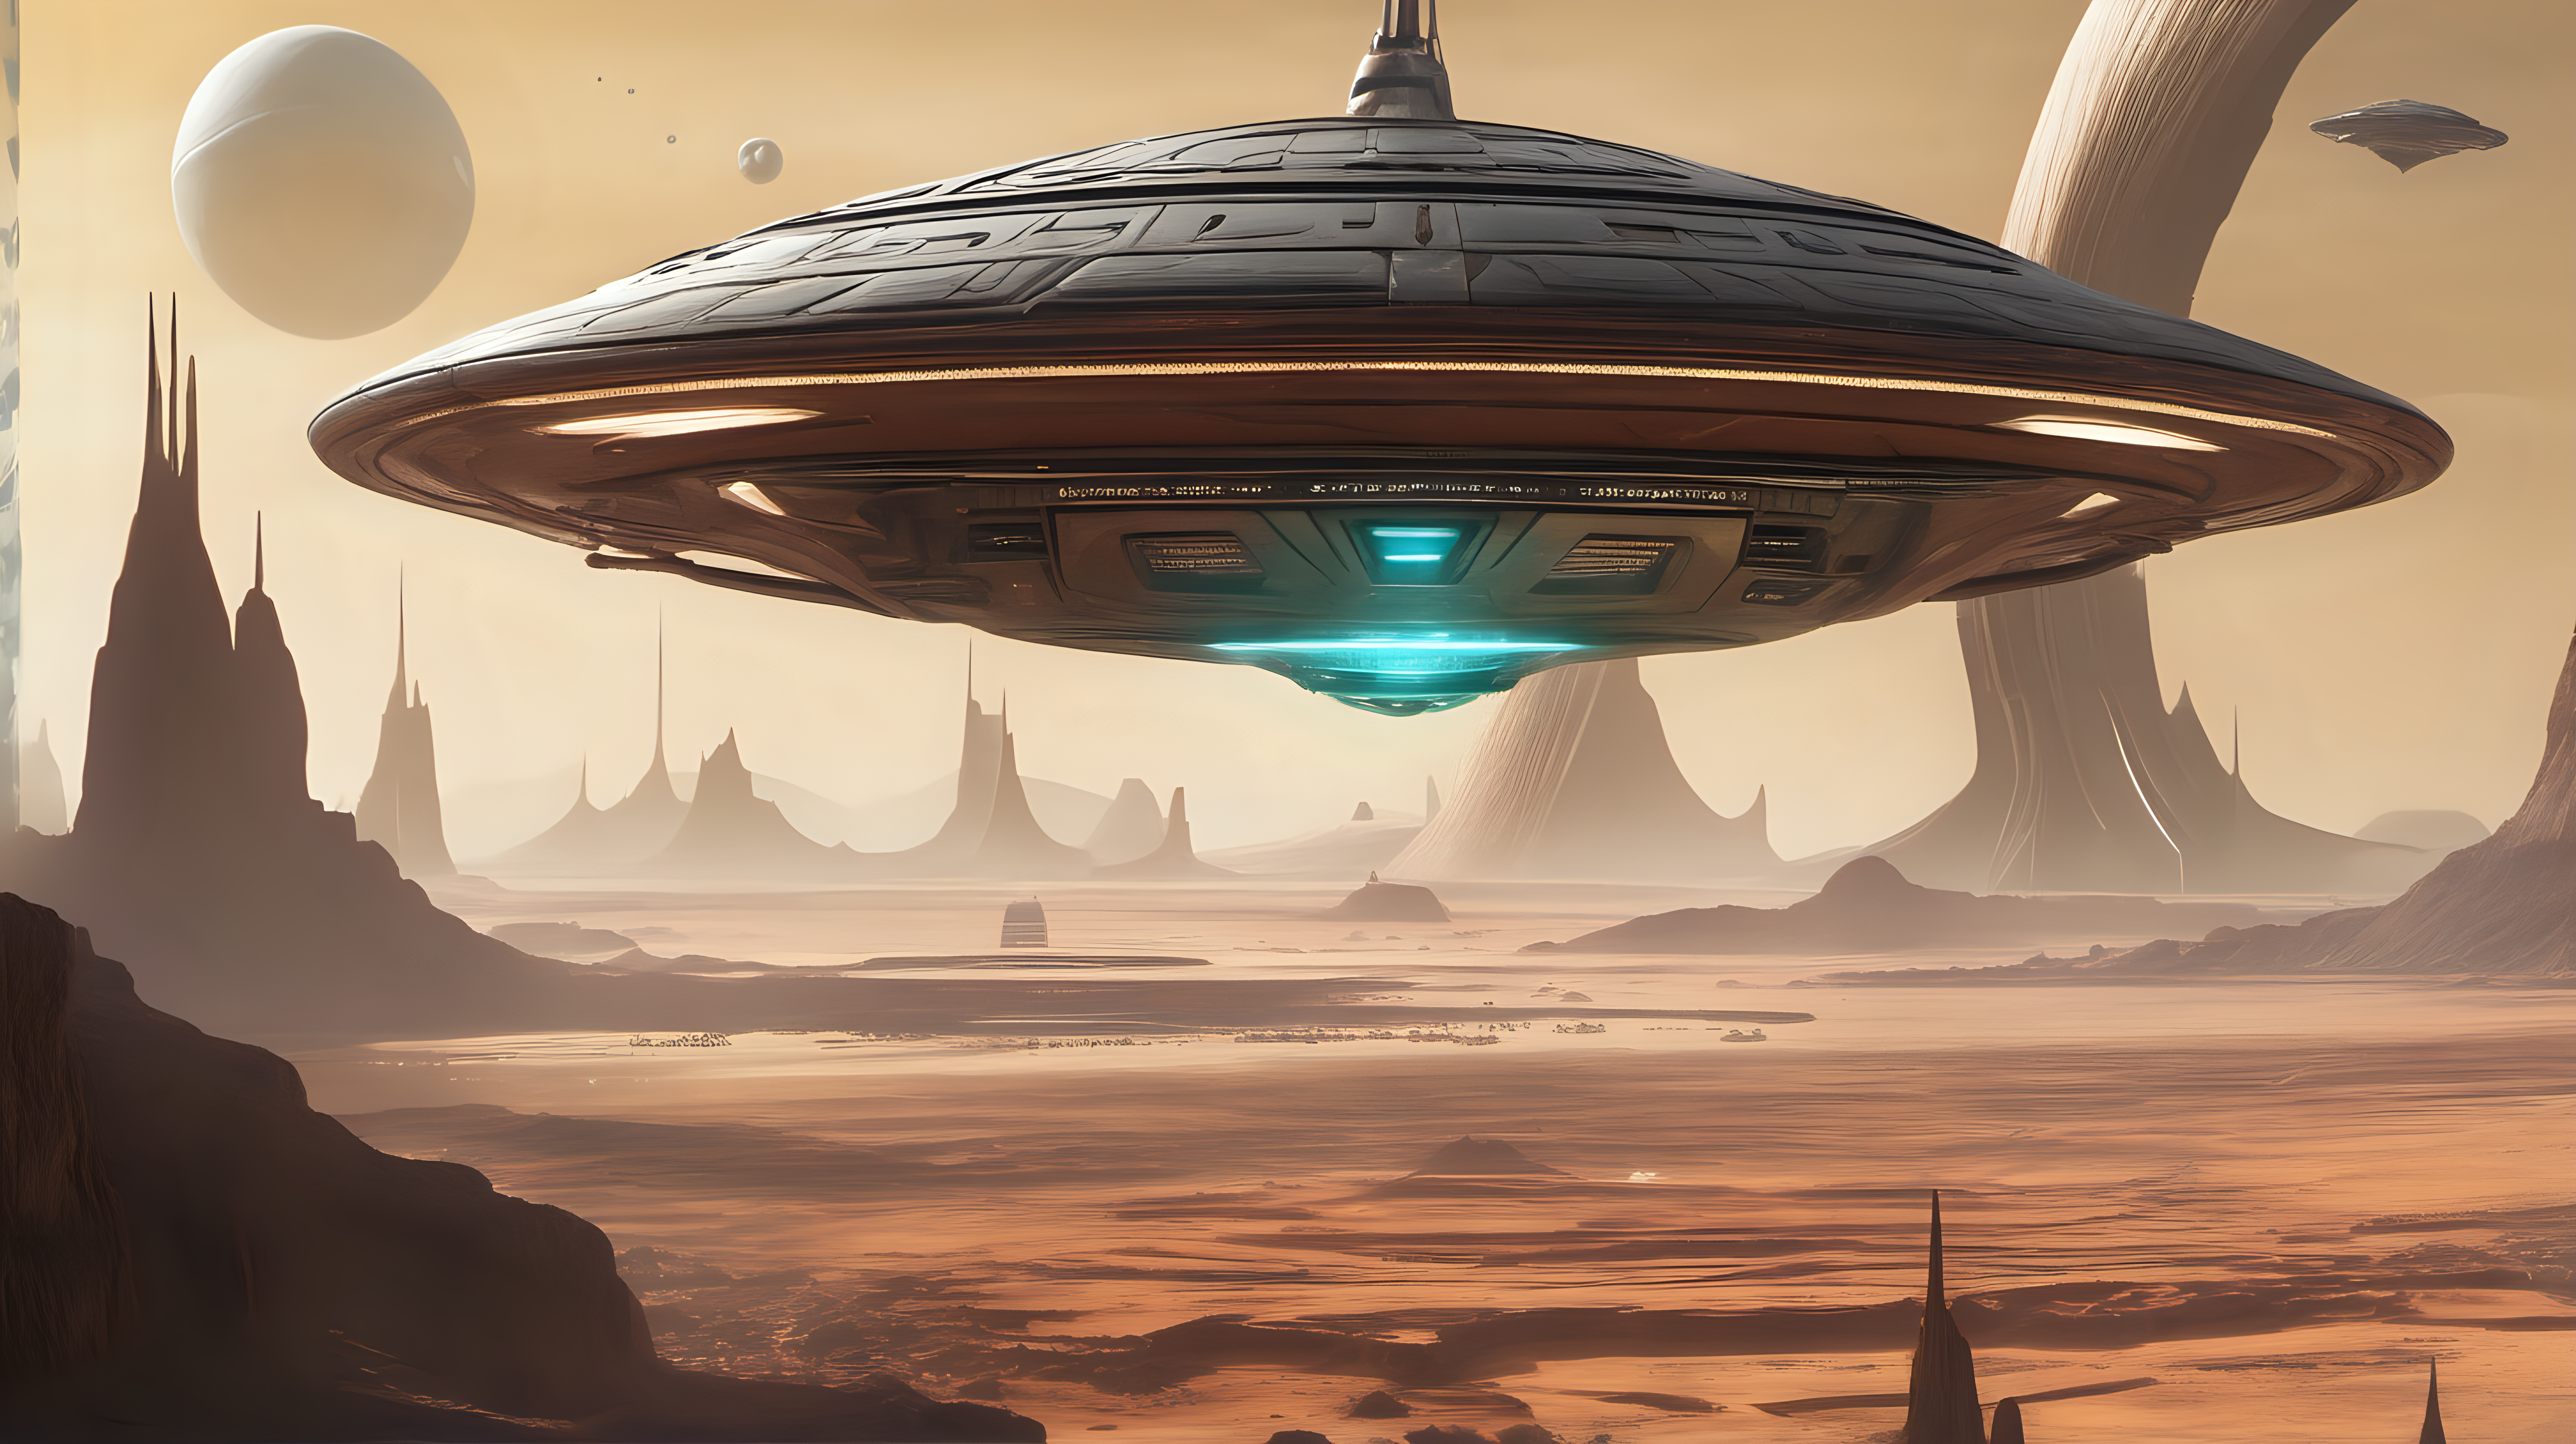 An alien spacecraft hovering in the foreground on an alien planet, a vast alien city in the background.